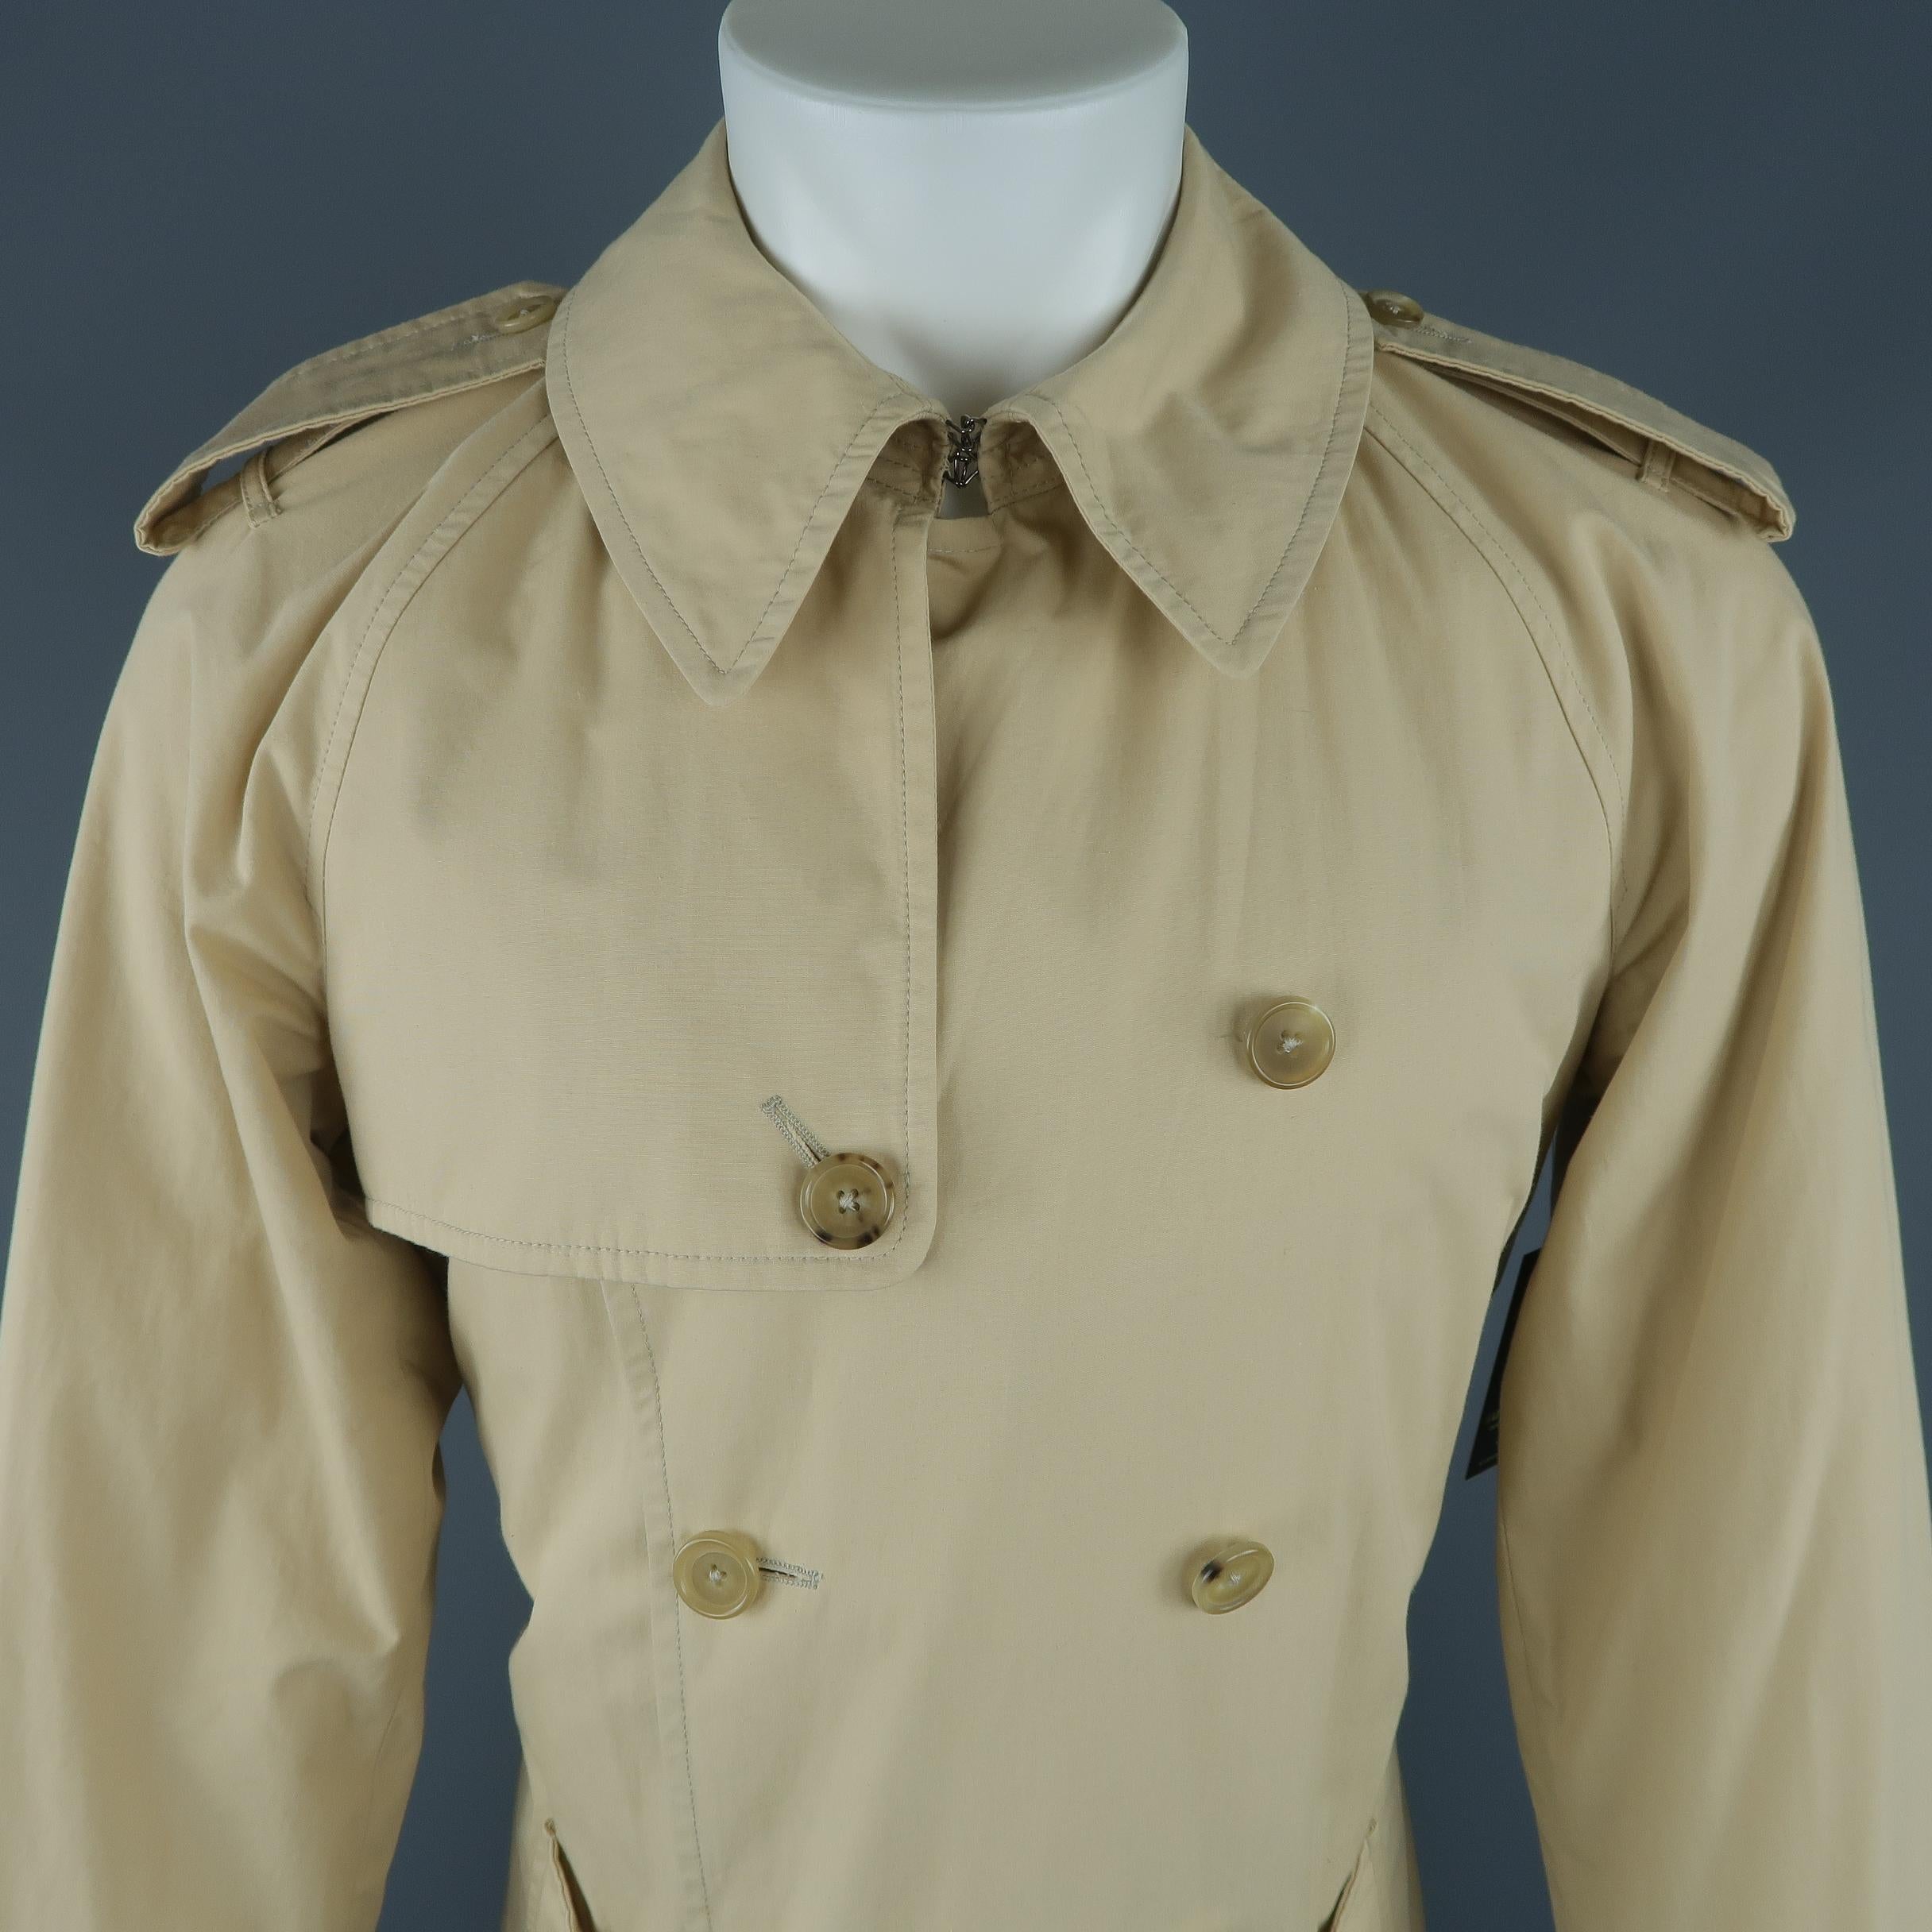 Ralph Lauren Purple Label trench coat comes in classic khaki cotton with a hook eye collar, storm flap, epaulets, double breasted closure, flap pockets, belted waist, and belted cuffs. Mark on epaulet. As-is Made in Italy.
 
Fair Pre-Owned